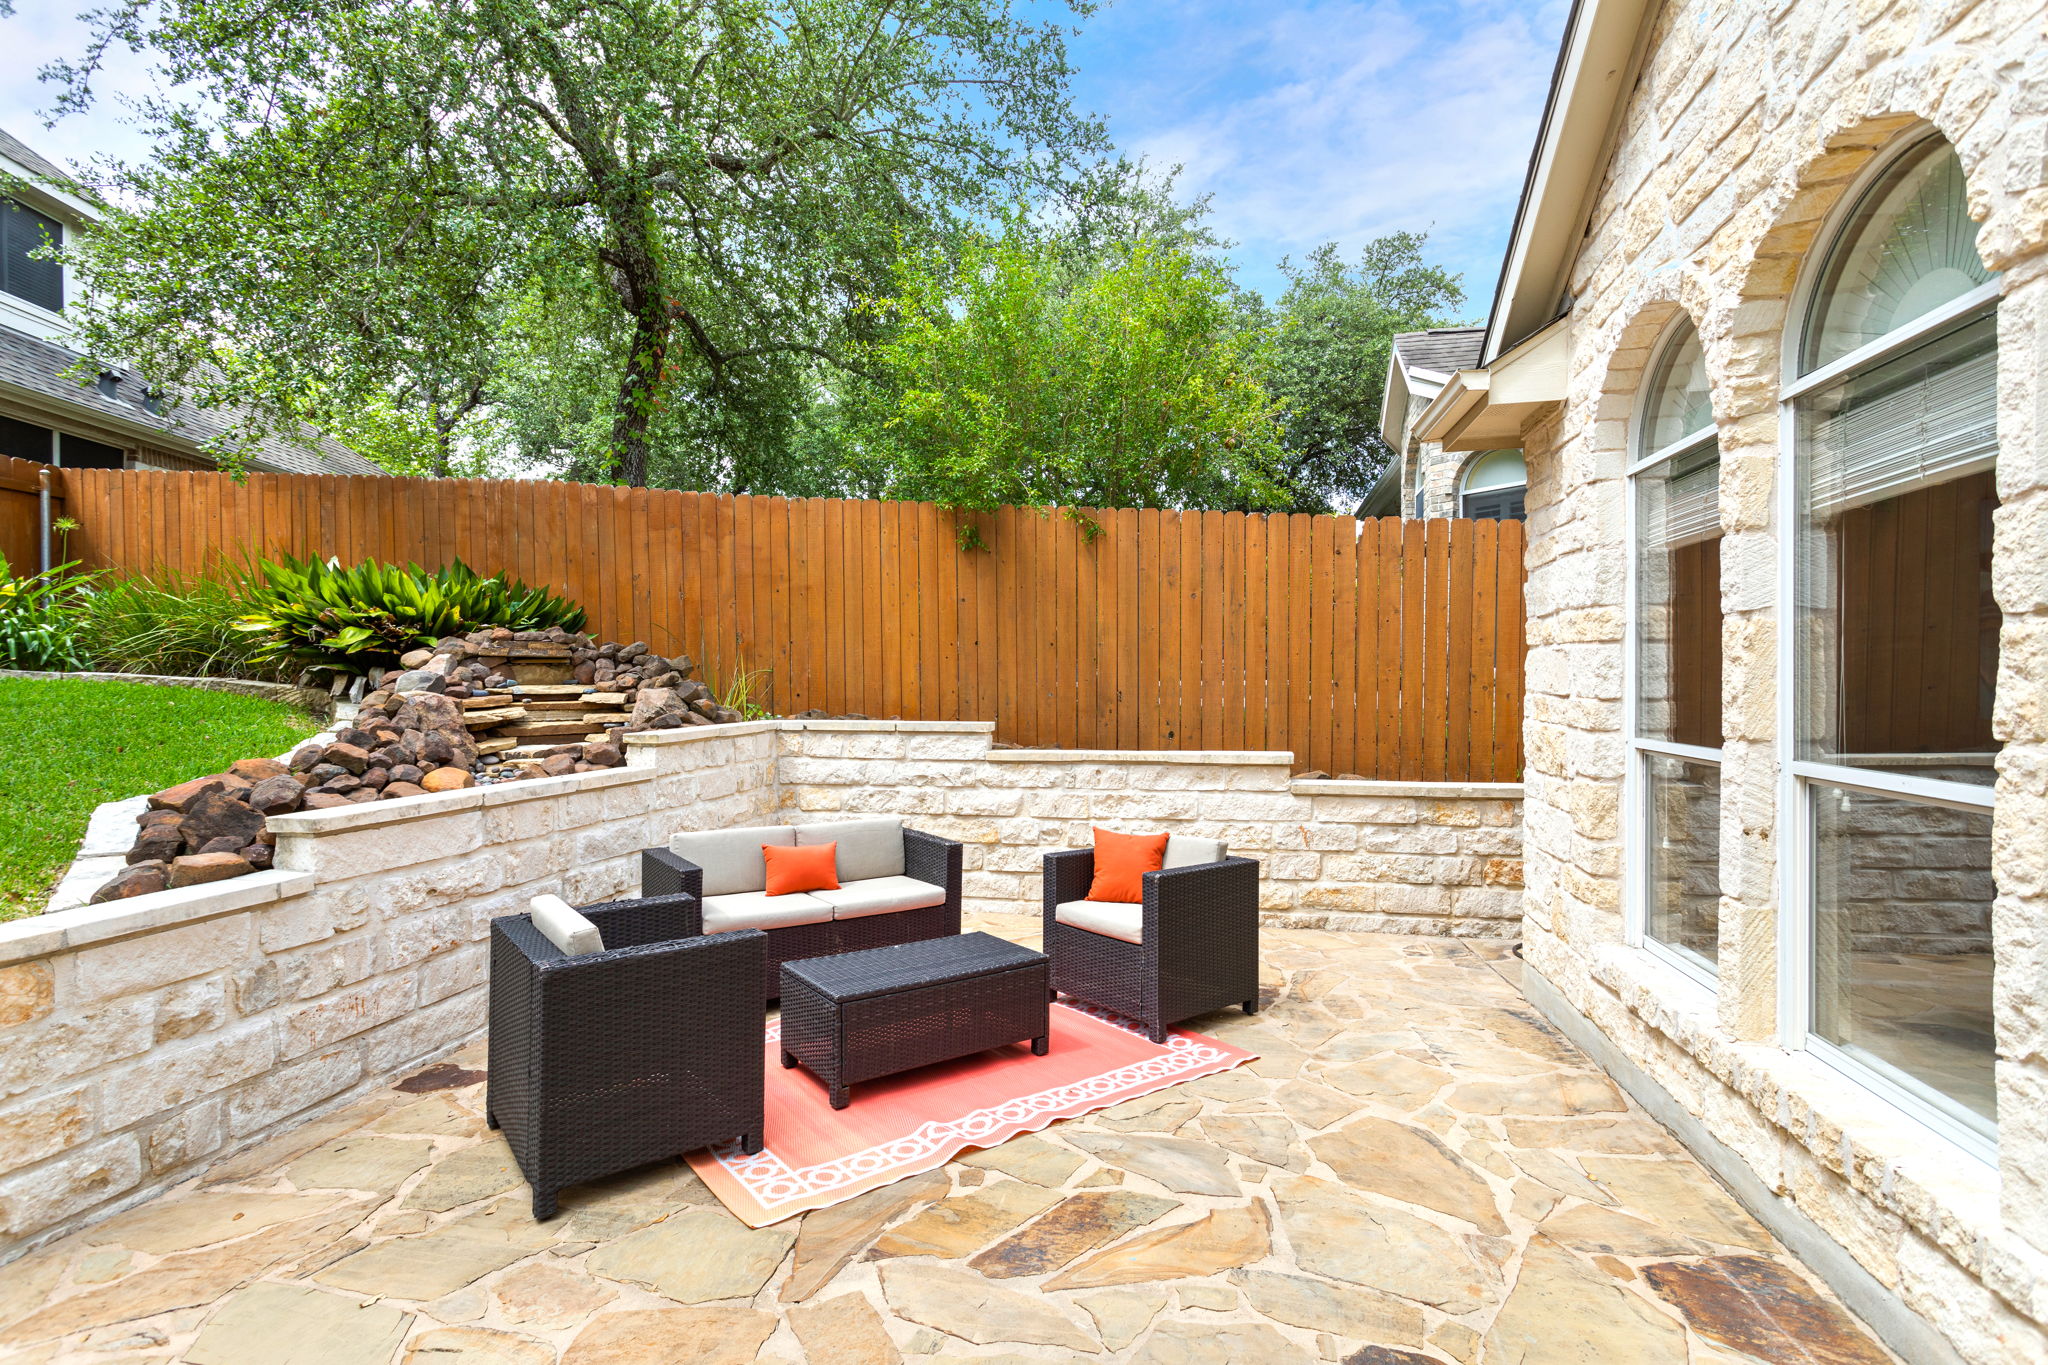 Large patio for outdoor enjoyment